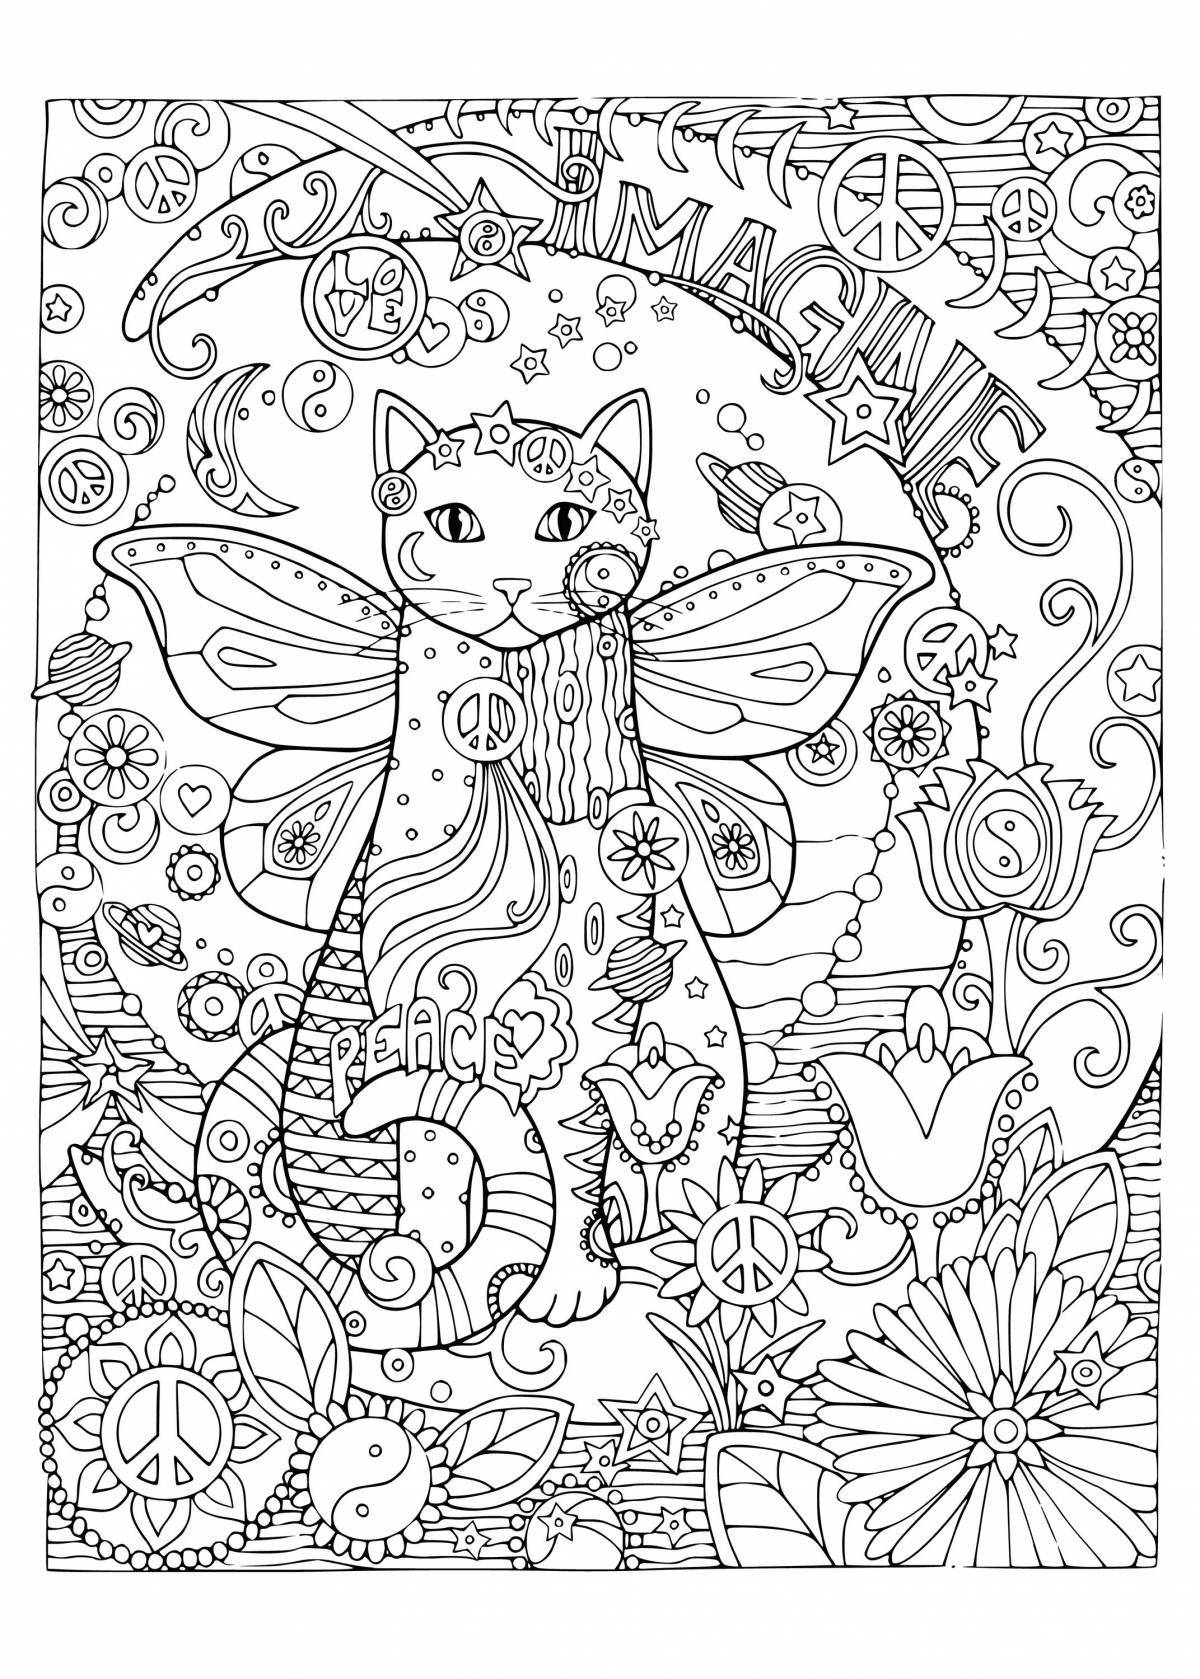 Great little coloring book for girls